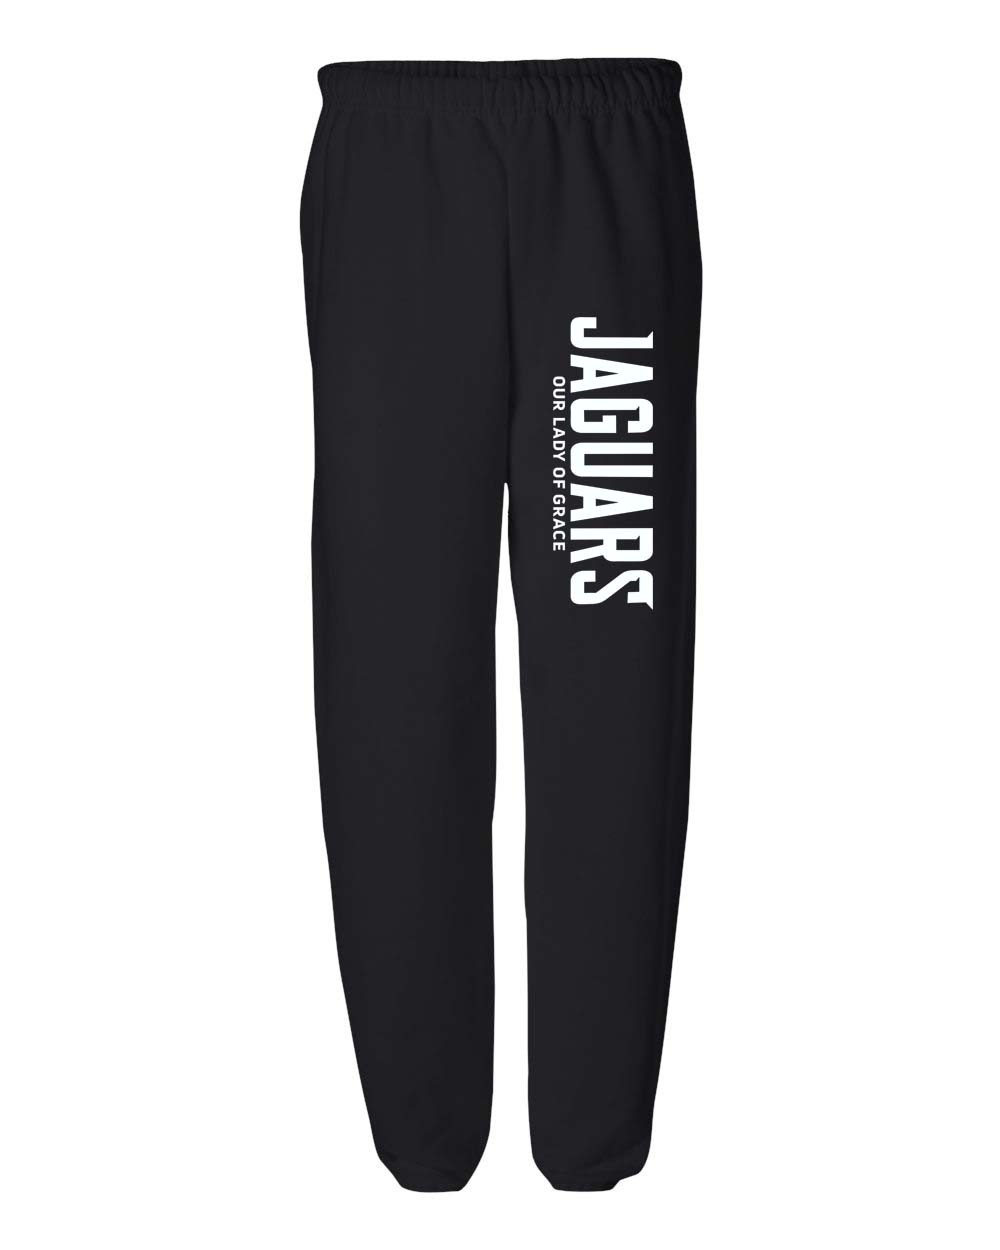 OLG Spirit Sweat Pants w/ White Logo - Please Allow 2-3 Weeks for Delivery